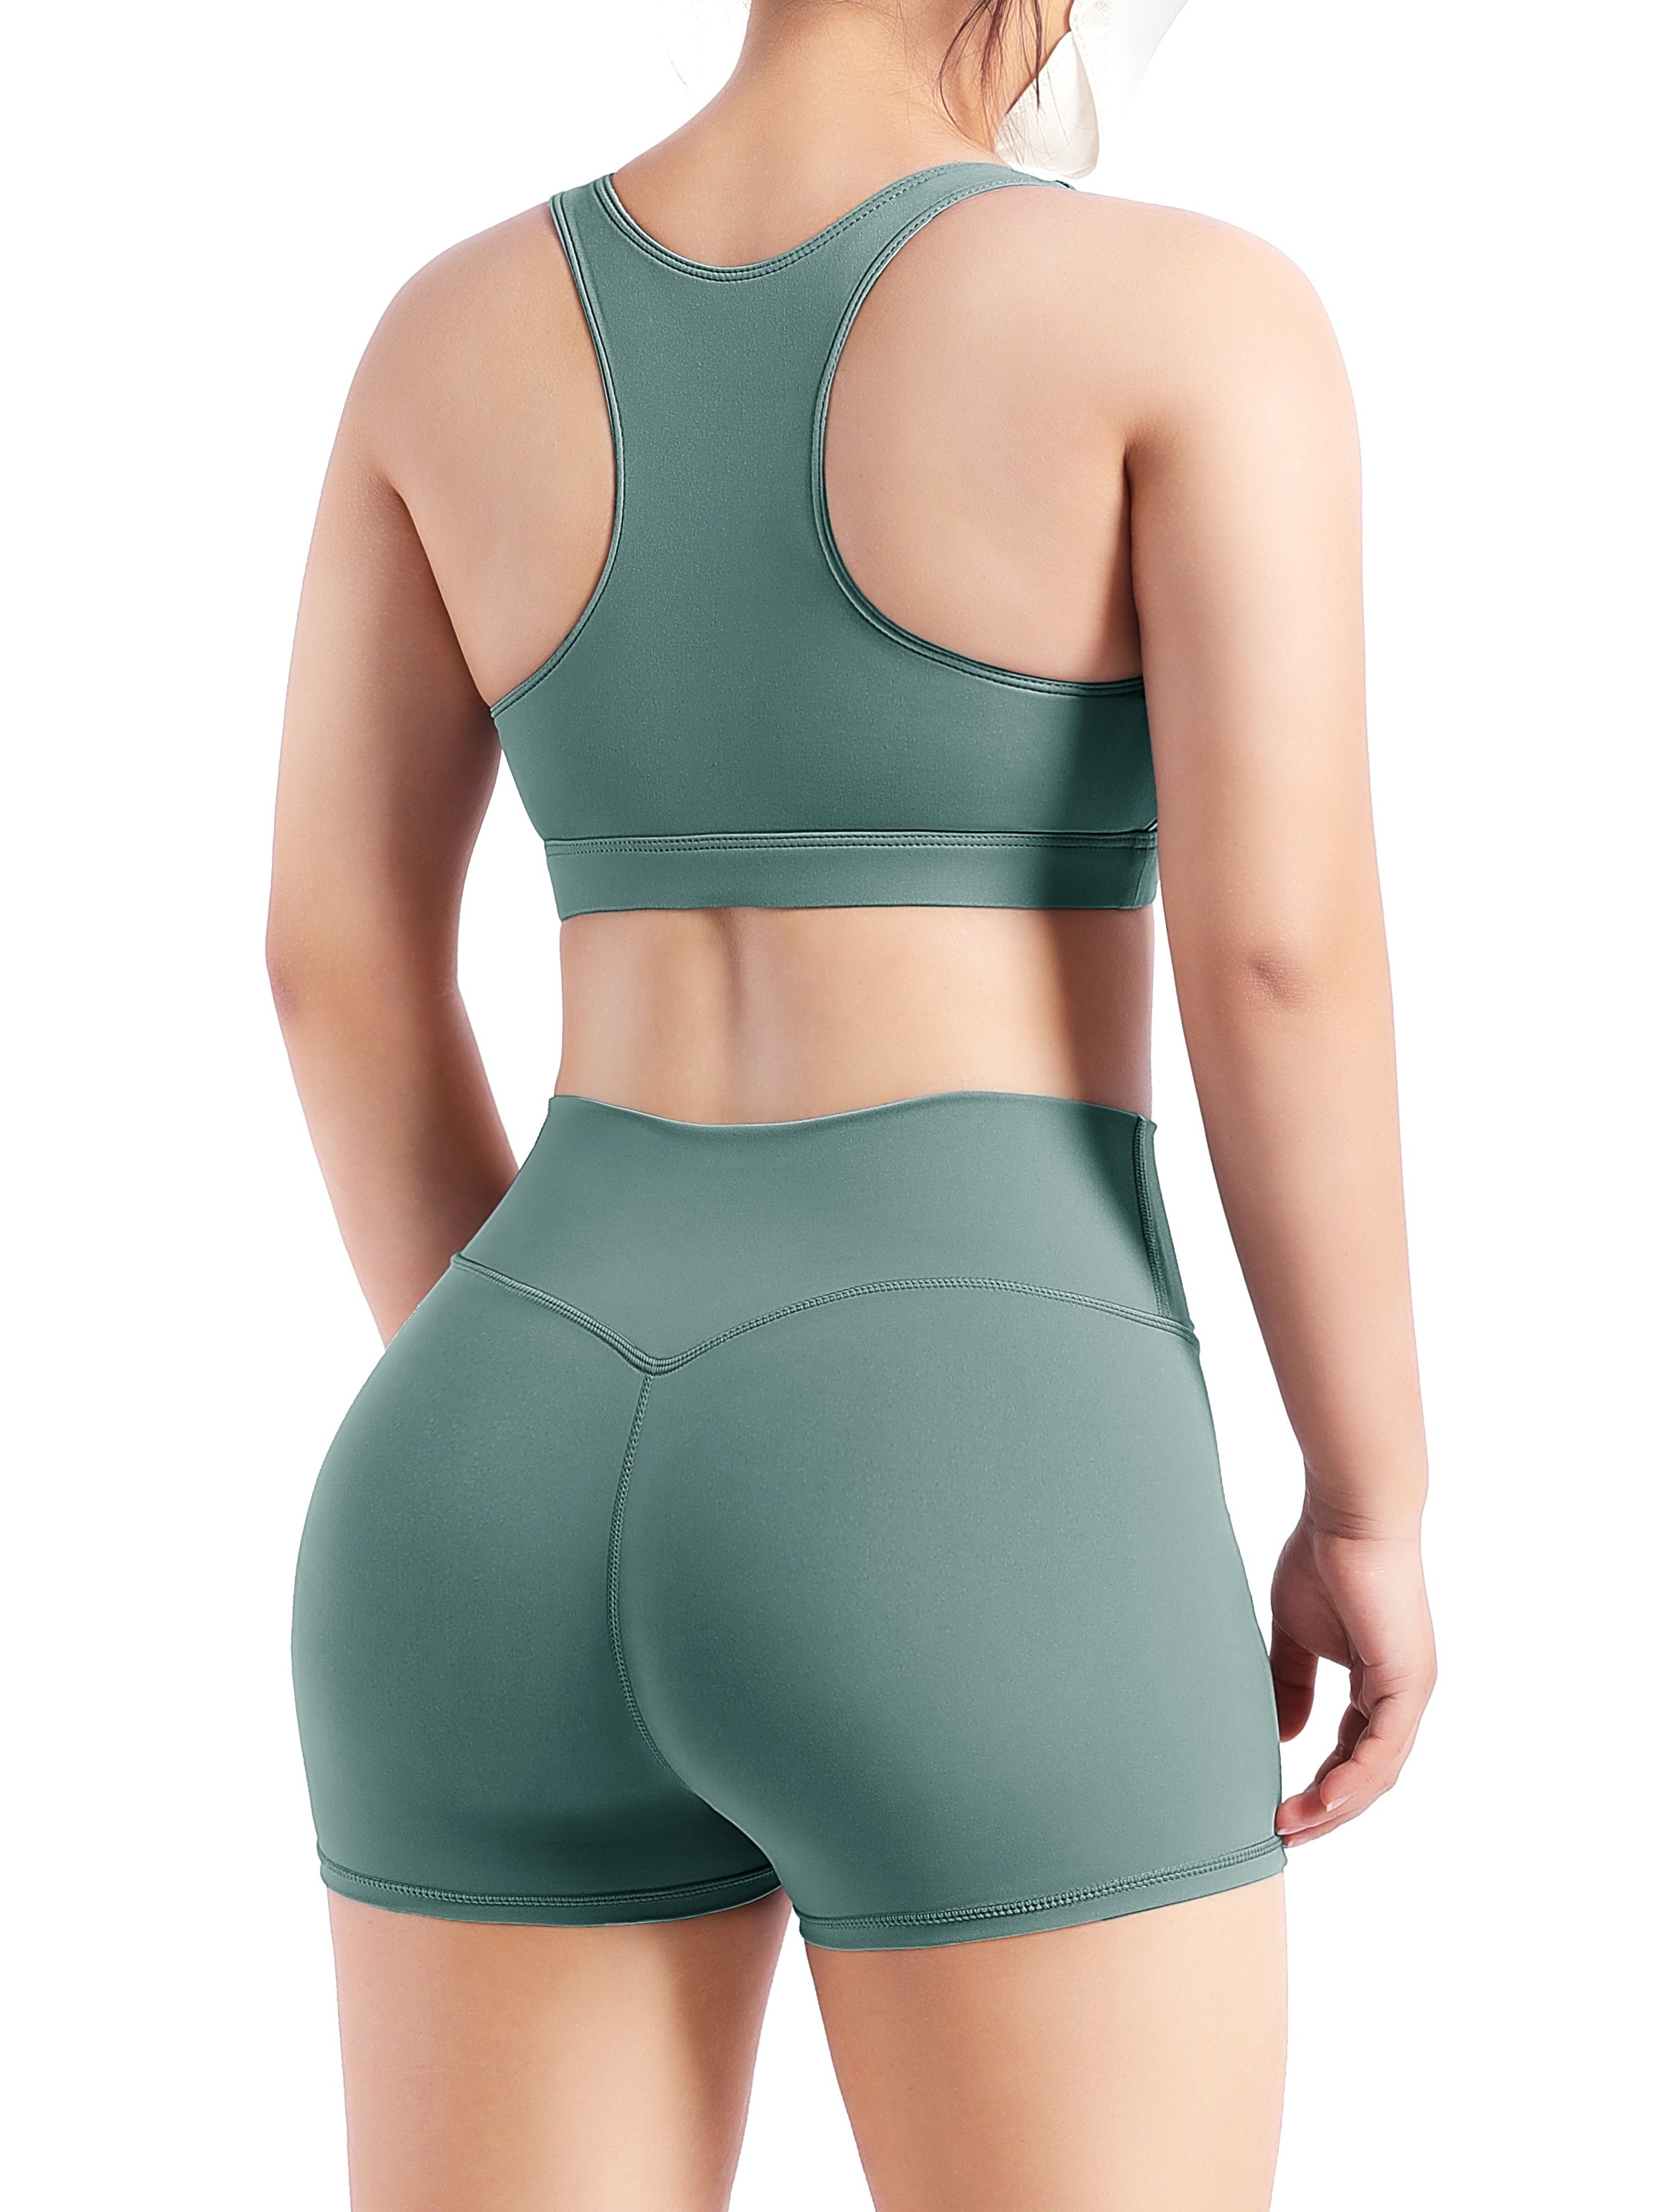 TomTiger Women Sports Bra High Impact ​with Removable Padded Activewear  ​Tank Tops ​for Yoga Workout Fitness (Chive Green, S) at  Women's  Clothing store